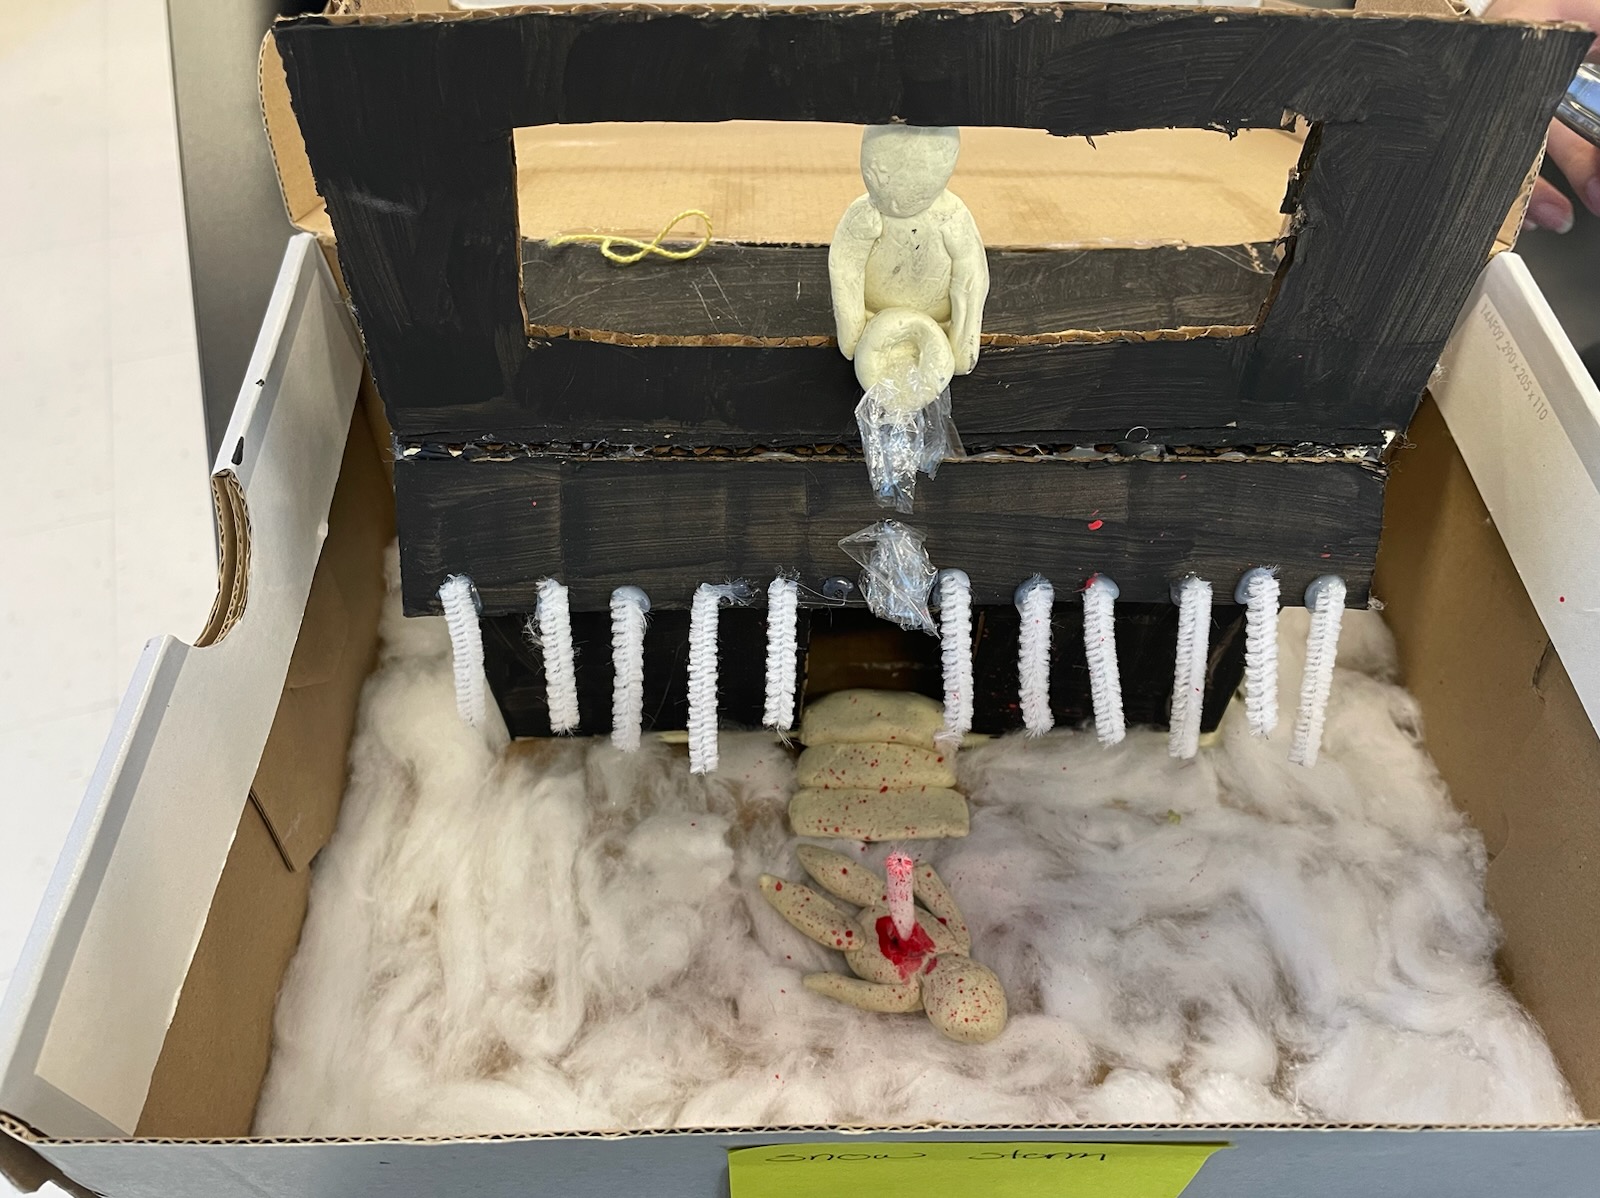 This is a photo of a student's crime scene in a shoebox project.